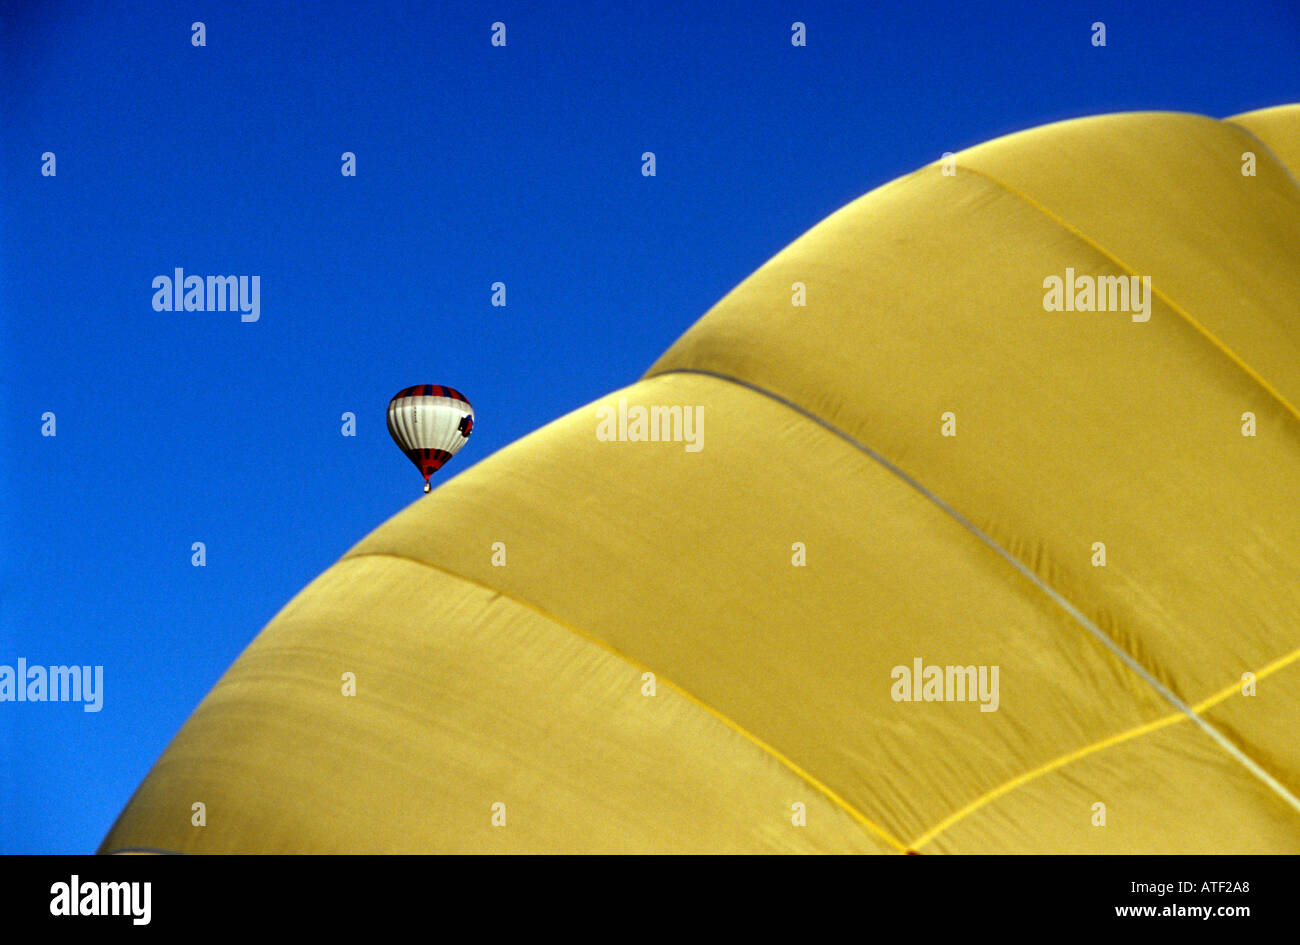 Yellow balloon being filled with hot air ready for flight with smaller balloon already in flight in distance. Stock Photo